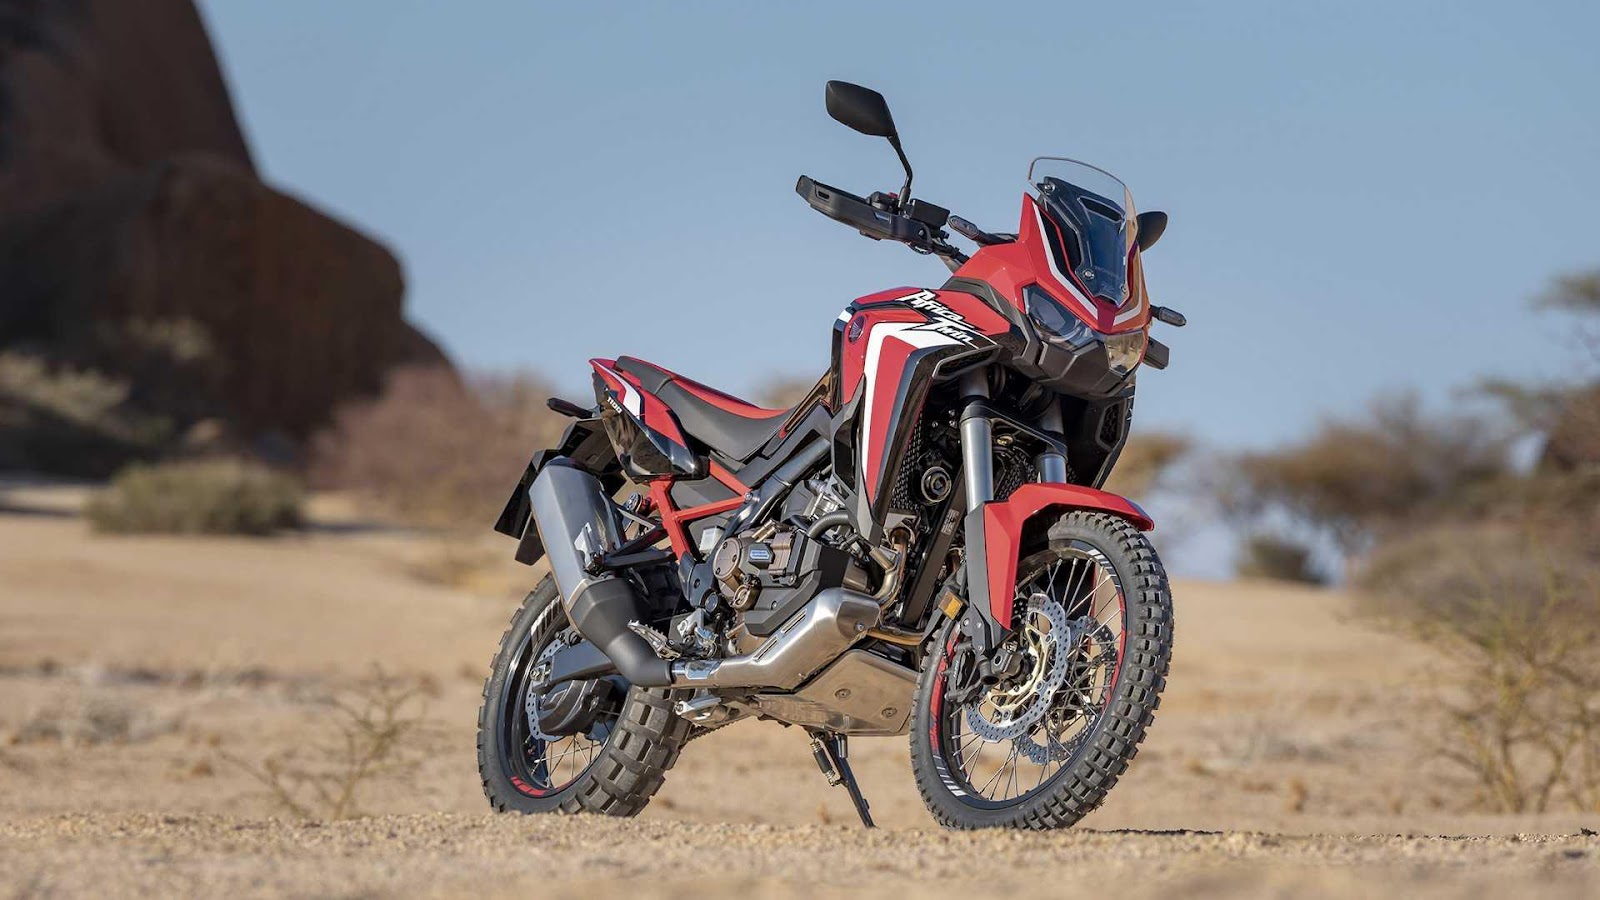 Honda  CRF1100L Africa Twin is one of the most capable off-road bikes in india